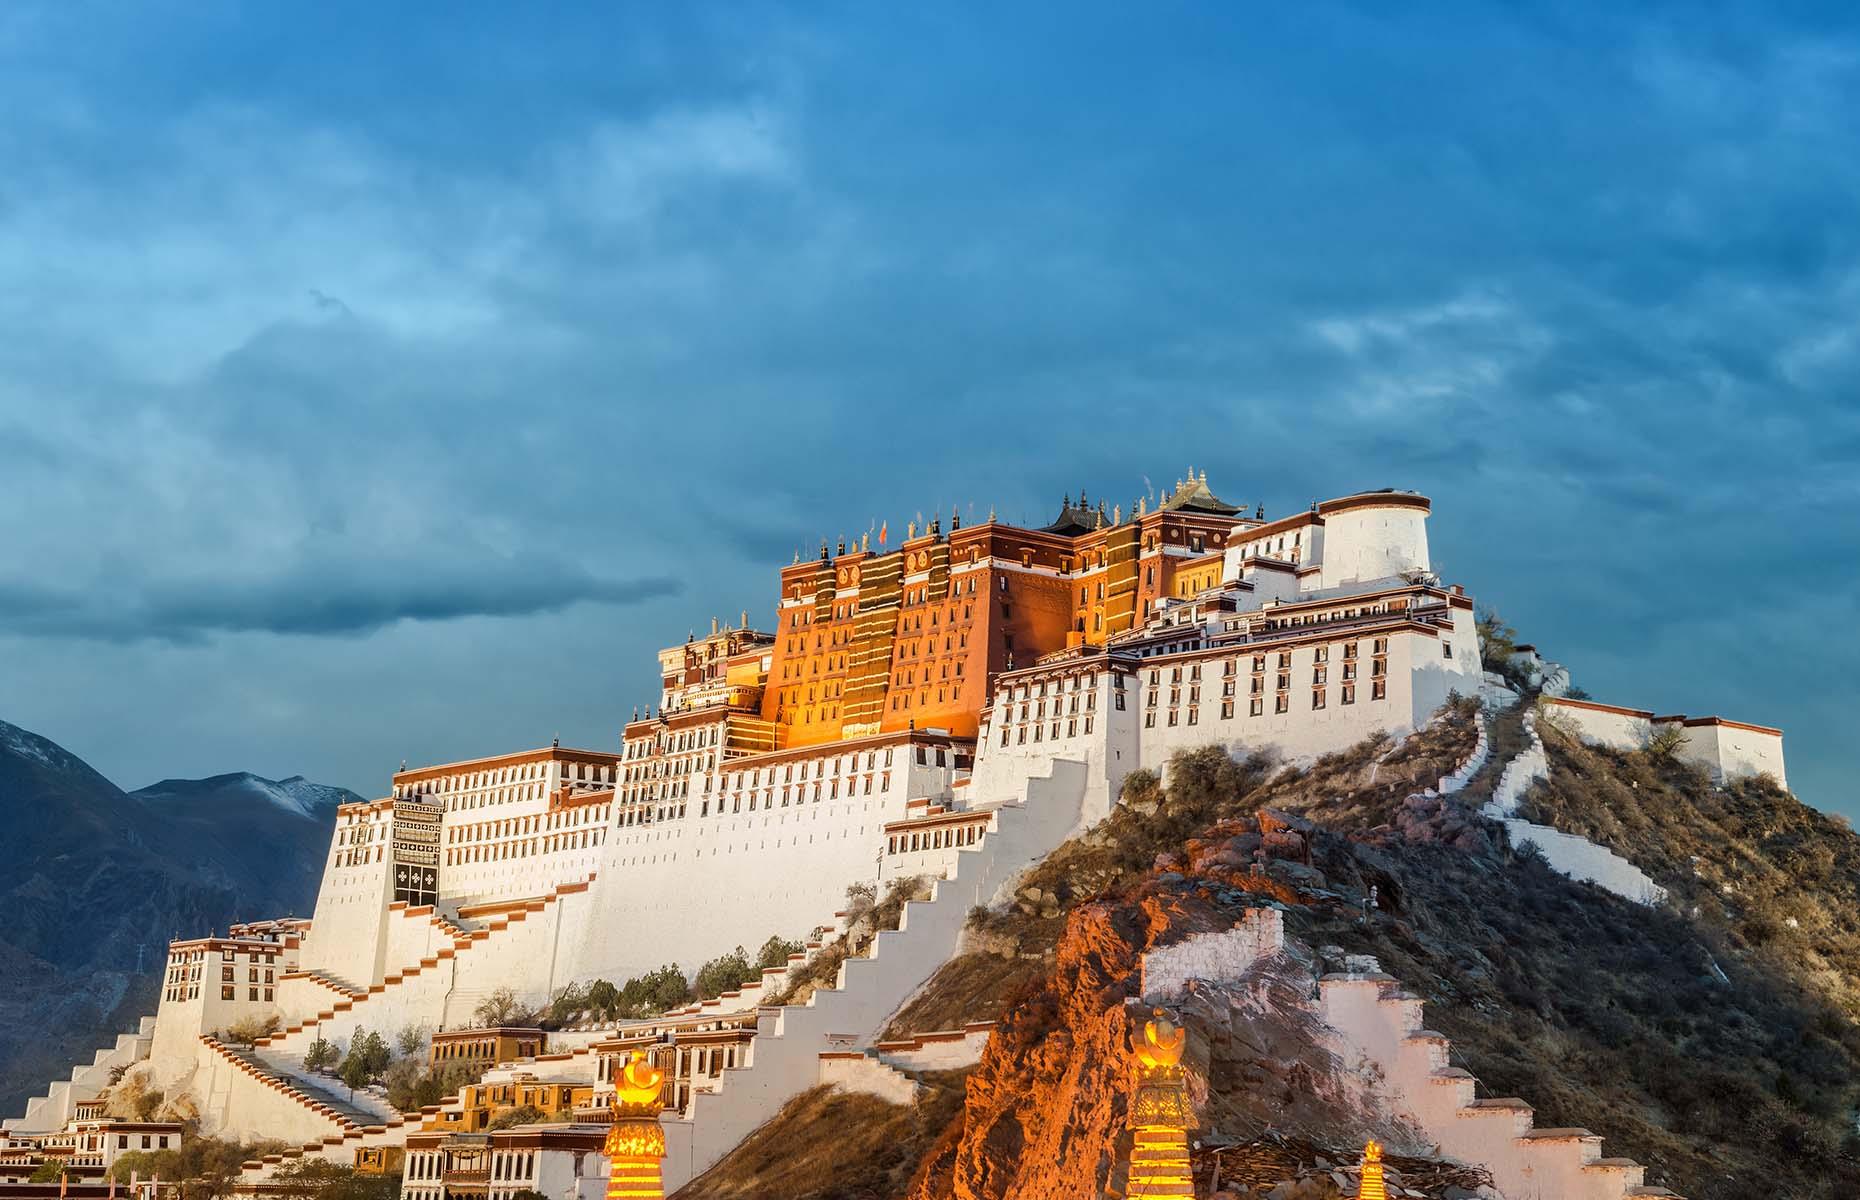 <p>The Holy City, the Place of the Gods, the centre of Tibetan Buddhism – Lhasa has a lot to live up to. But it would be hard not to be moved by the first sight of Potala Palace or the fervour of pilgrims walking the Barkhor circuit around the Jokhang temple in winding, incense-scented alleys. Perhaps it’s the altitude, but Lhasa seems to have something magical about it.</p>  <p><a href="https://www.loveexploring.com/galleries/94483/the-most-wonderful-views-on-earth?page=1"><strong>Now take a look at the most wonderful views on Earth</strong></a></p>